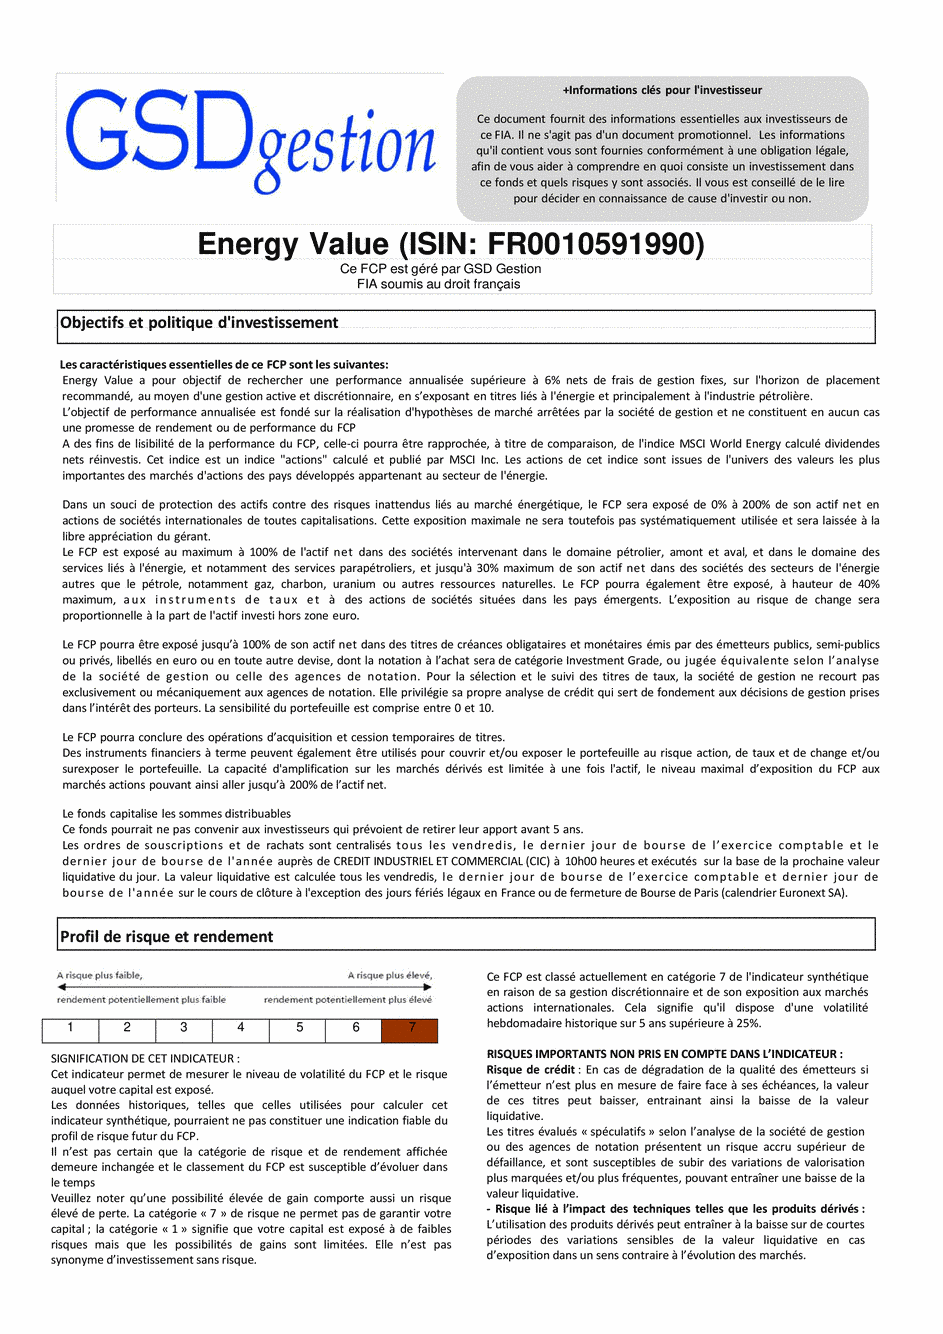 DICI-Prospectus Complet Energy Value - 07/08/2019 - undefined